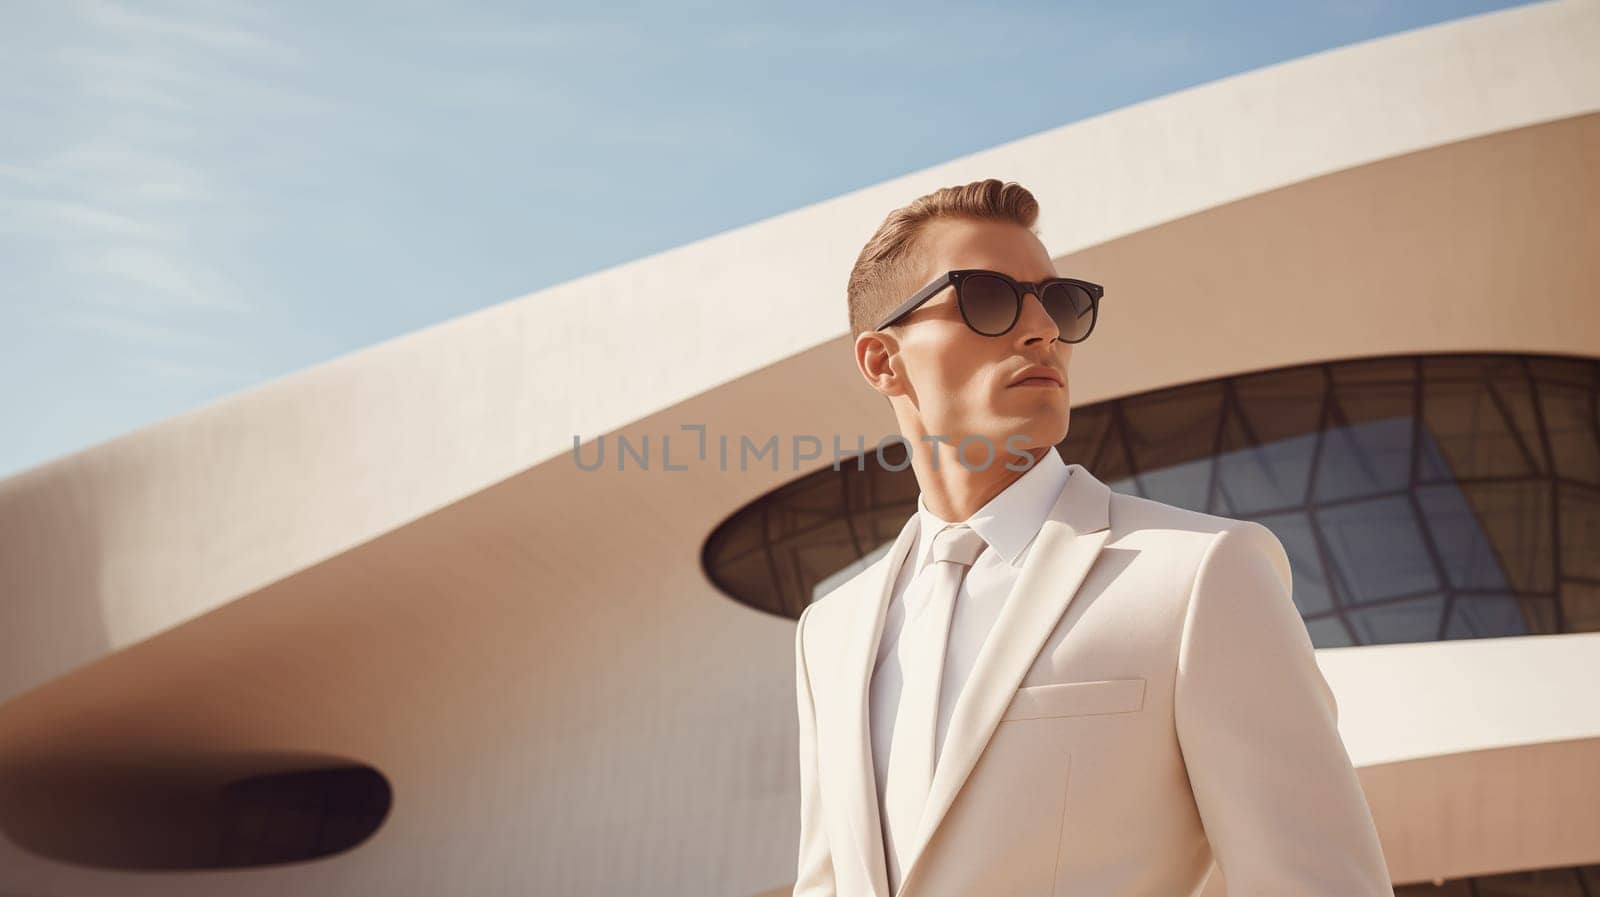 Fashionable successful stylish man in business suit, minimalism design architecture modern building by Rohappy